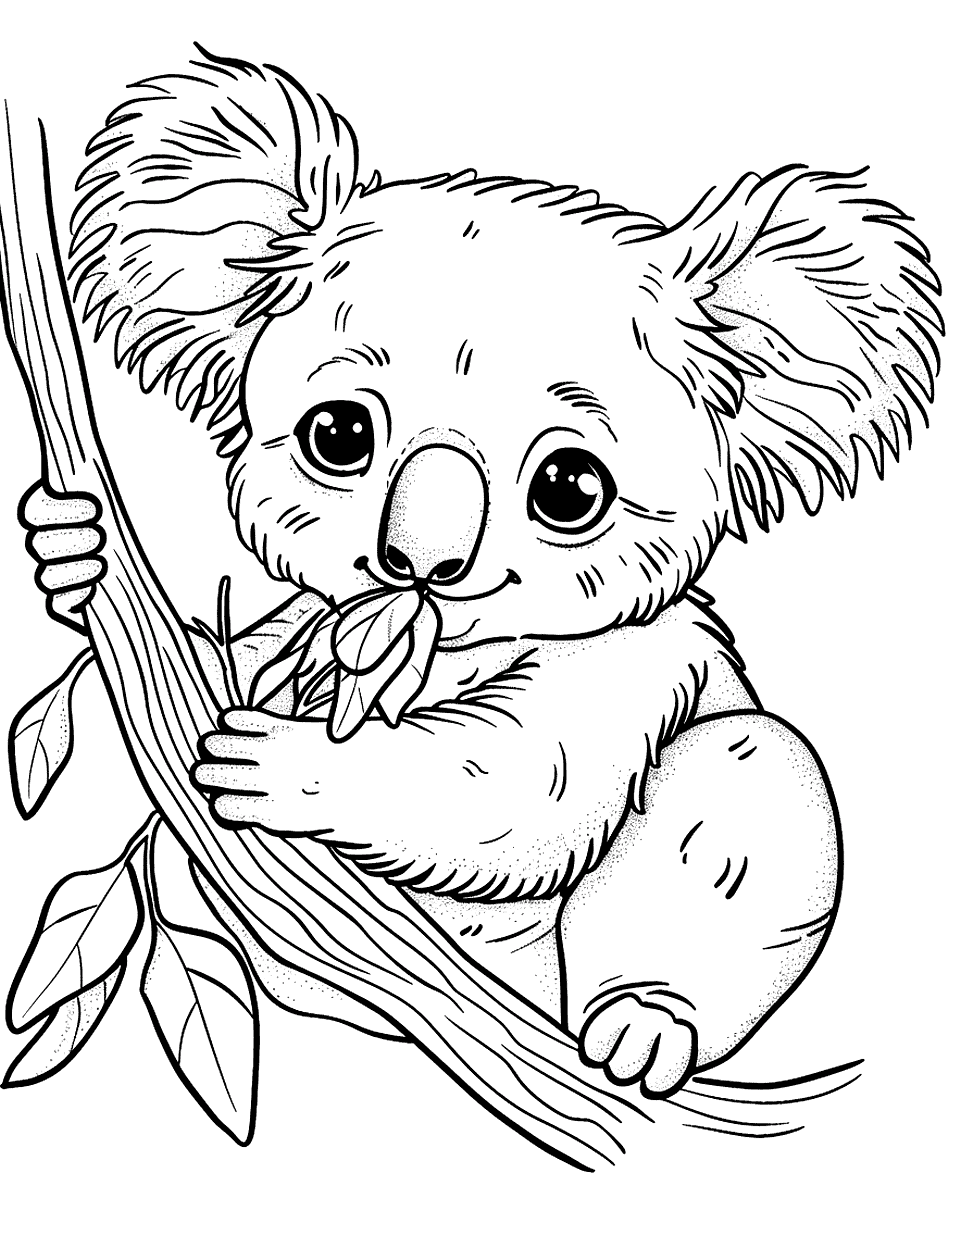 Koala Enjoying a Snack Coloring Page - A koala contently eating eucalyptus leaves, with a happy expression.